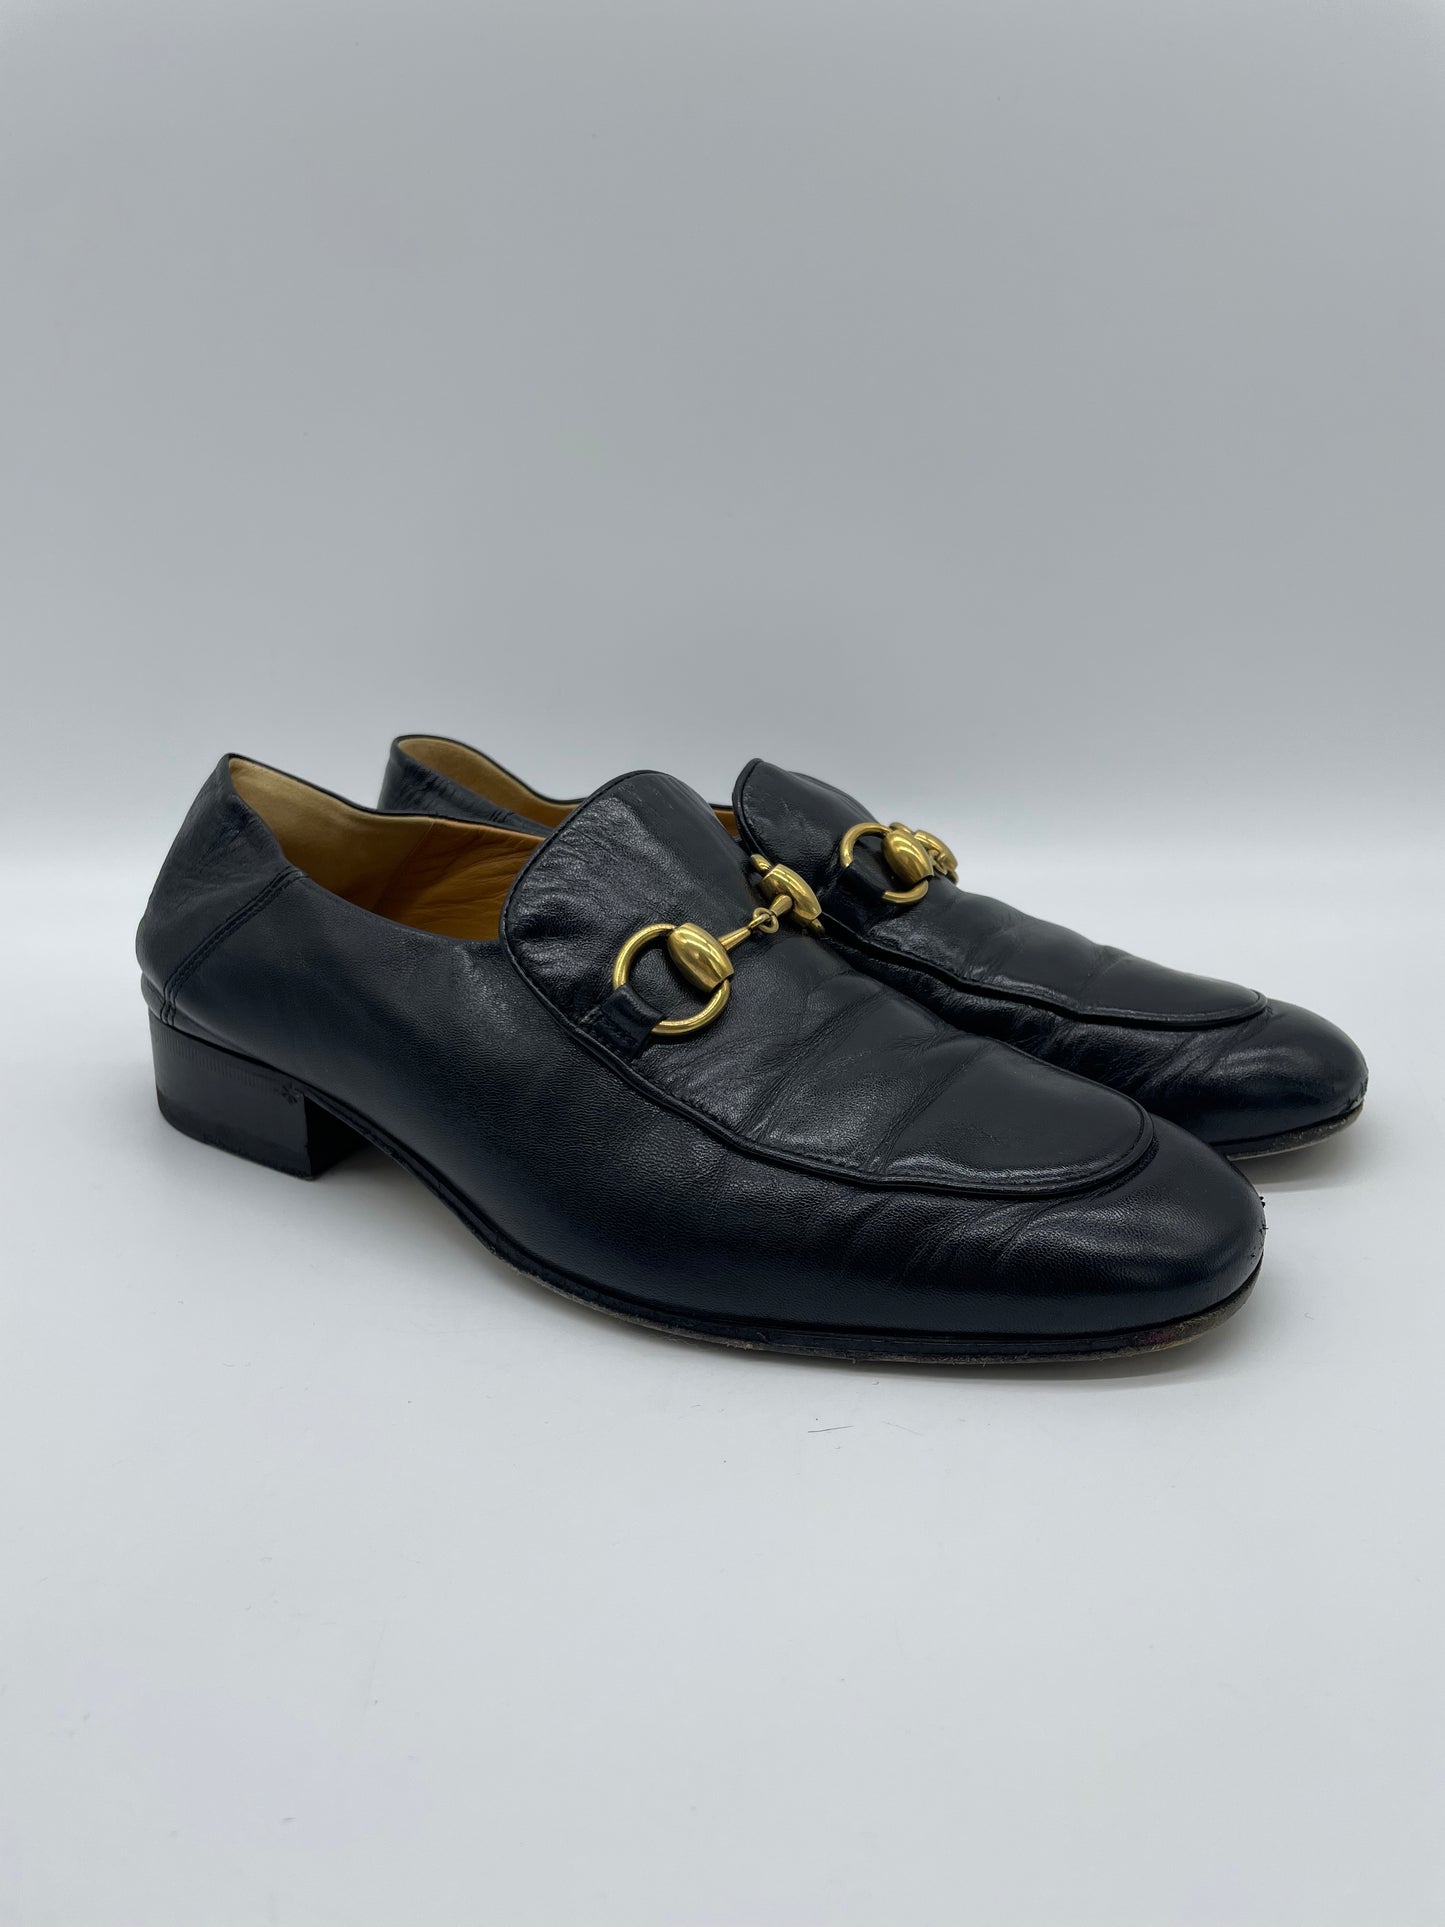 Gucci 1955 Horsebit Accent Leather Loafers